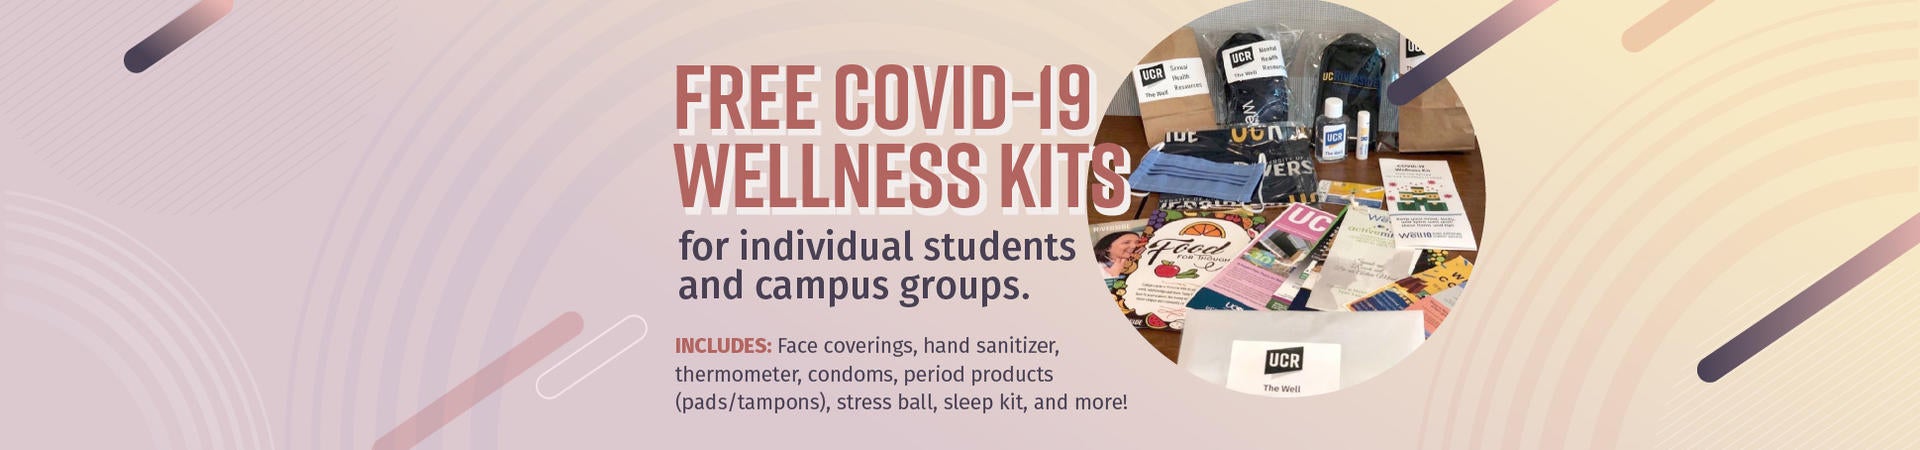 Free COVID-19 Wellness Kits for individual students and campus groups.